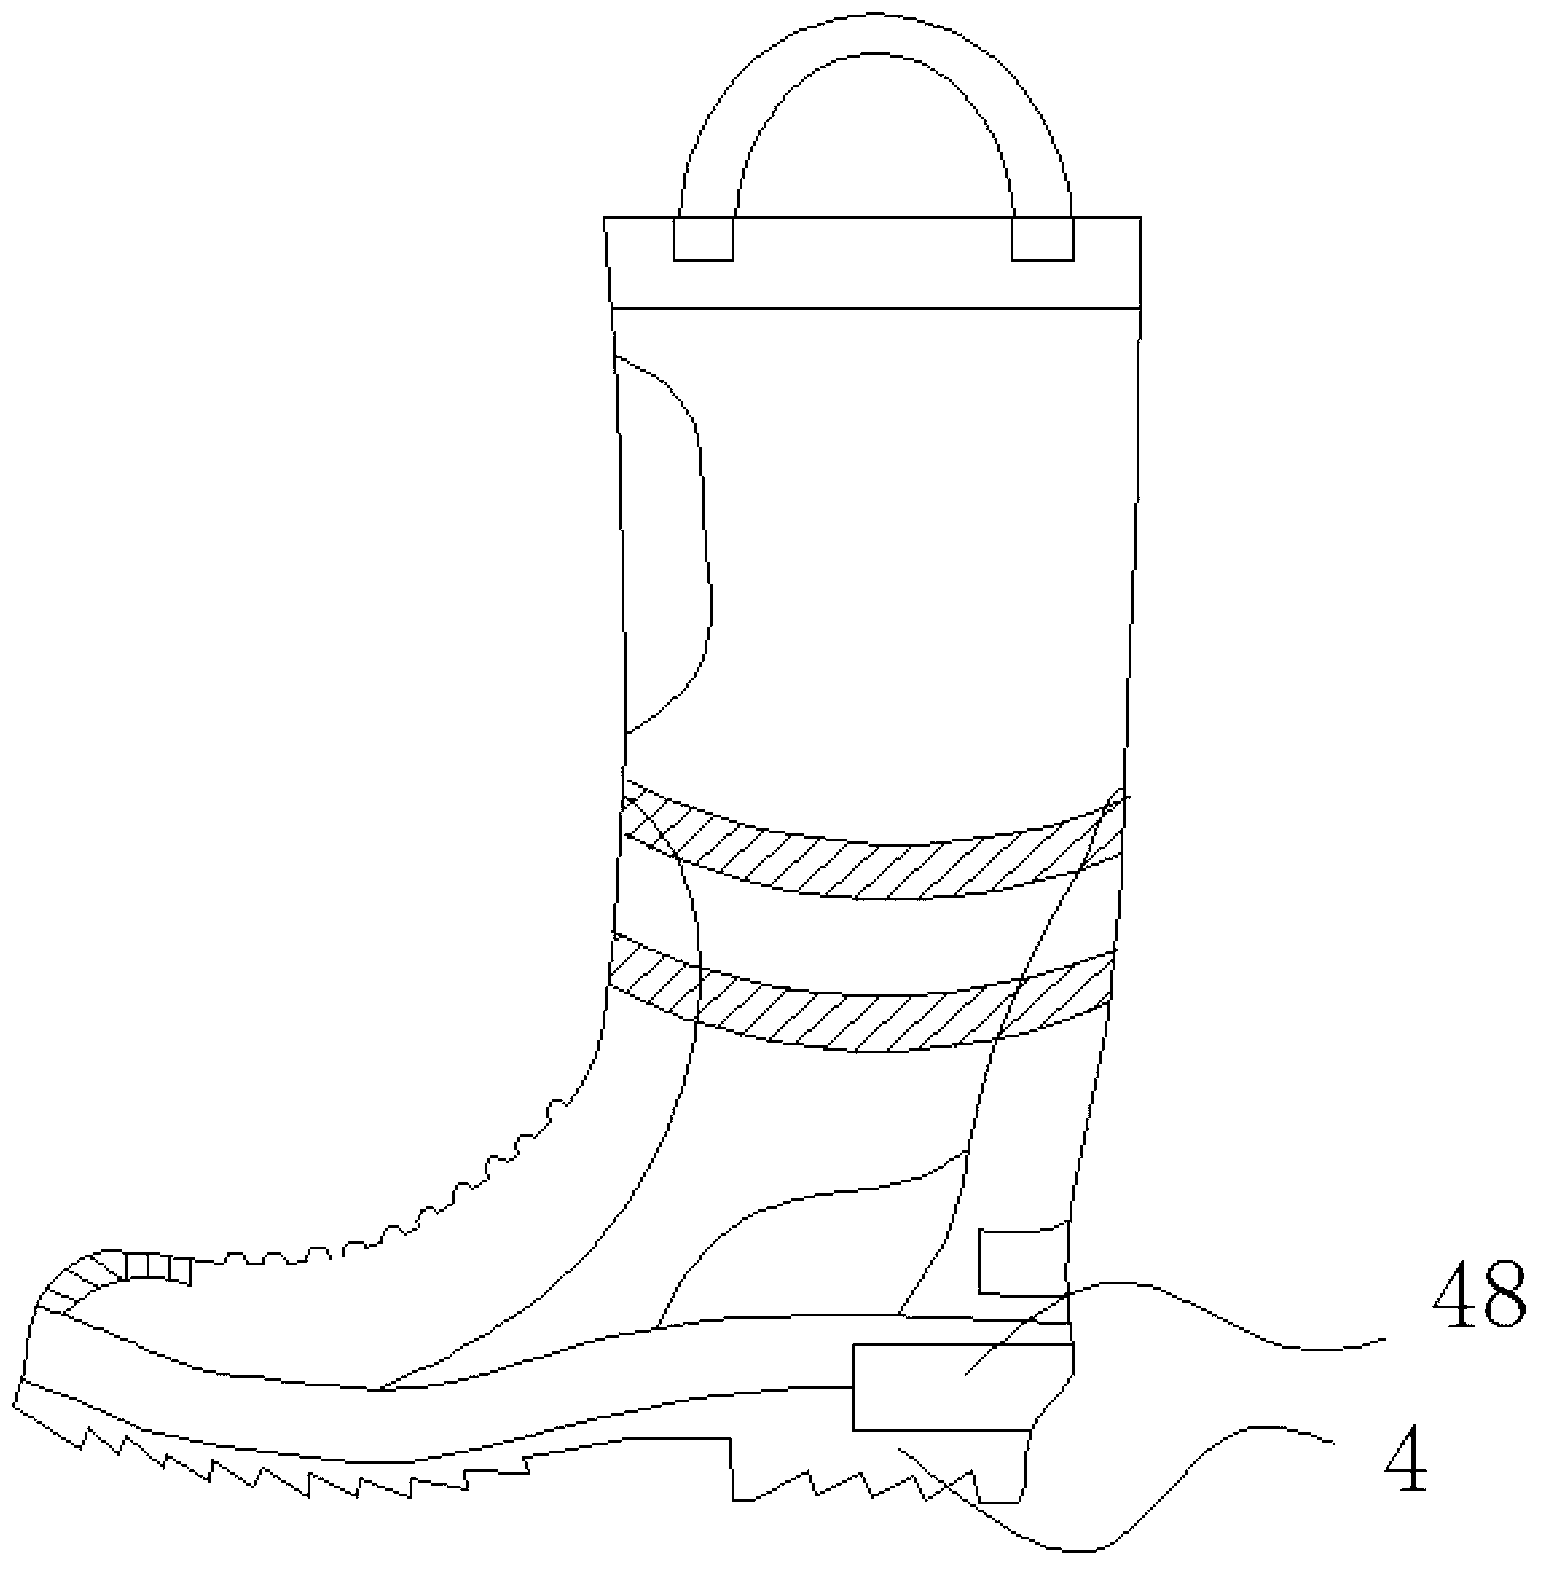 Storing and anti-piercing labor protection boot